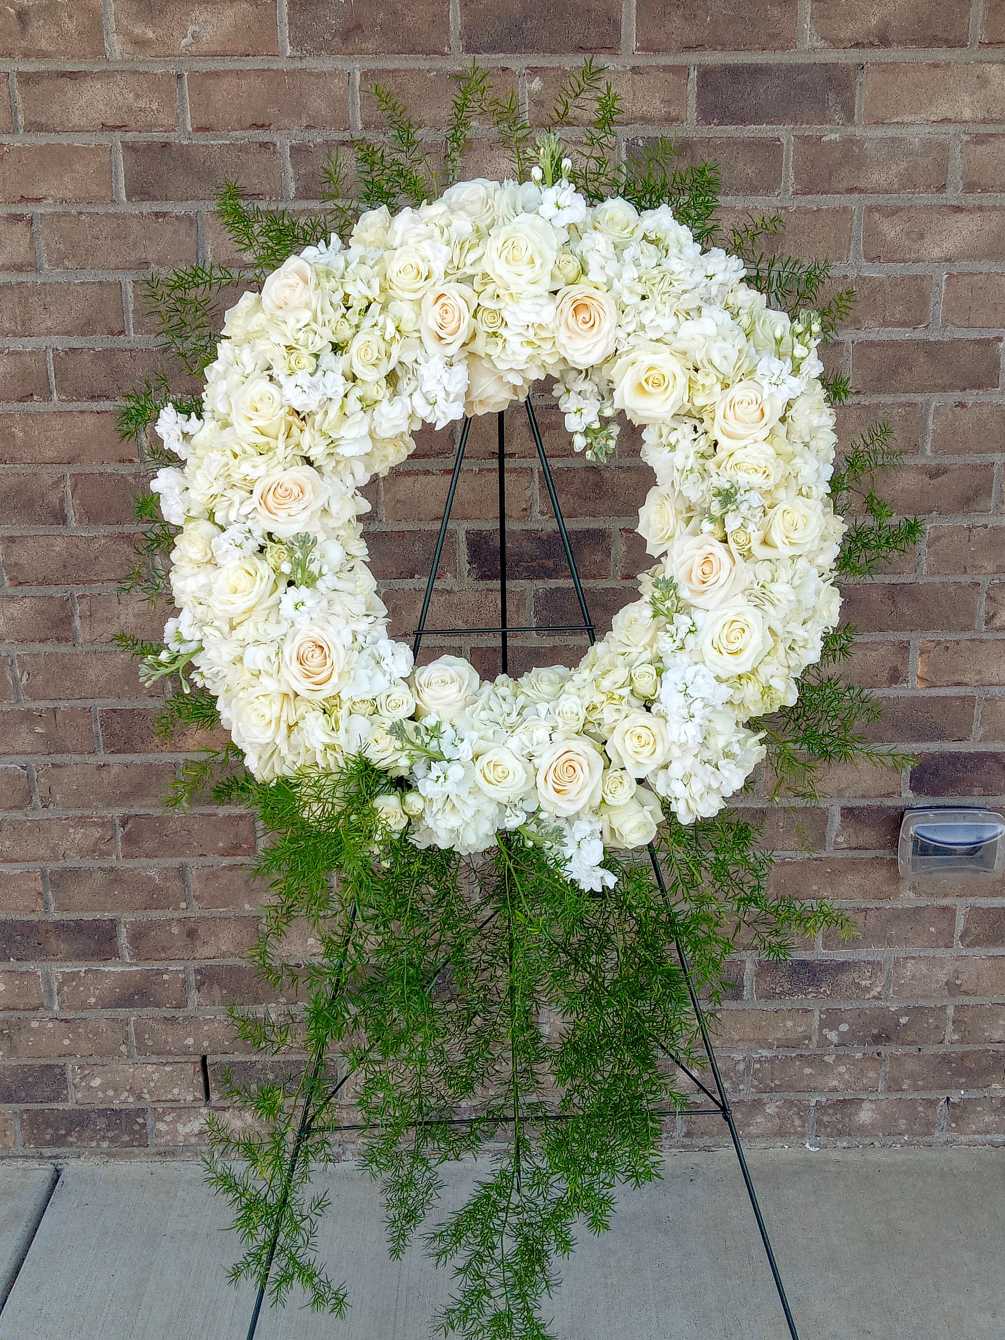 A beautiful round wreath of roses and hydrangeas.